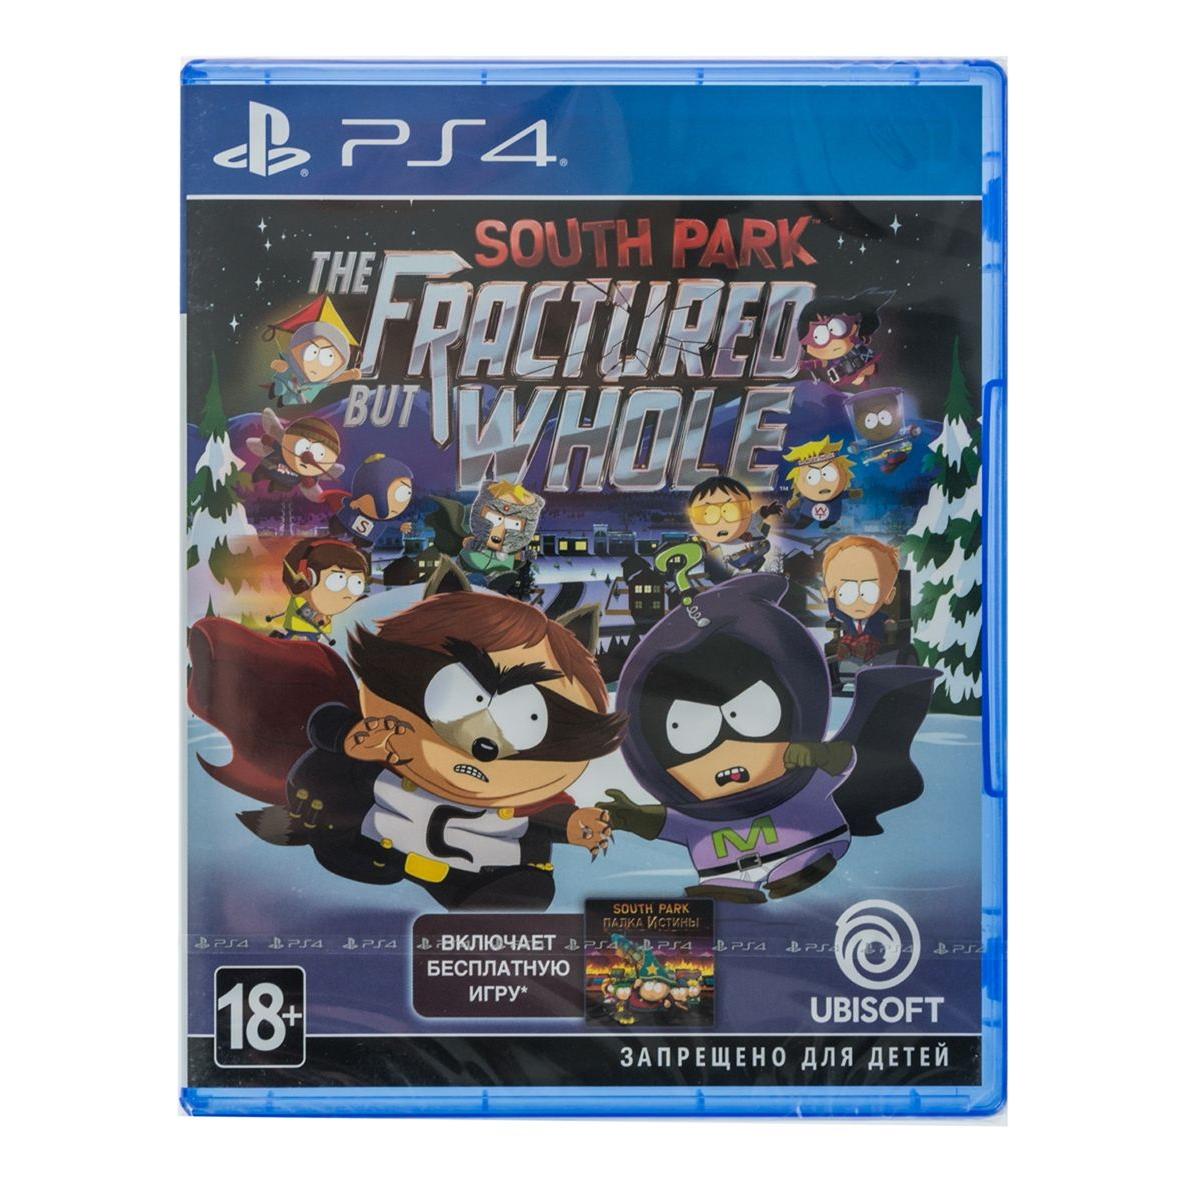 South park the fractured but whole купить ключ steam дешево фото 15